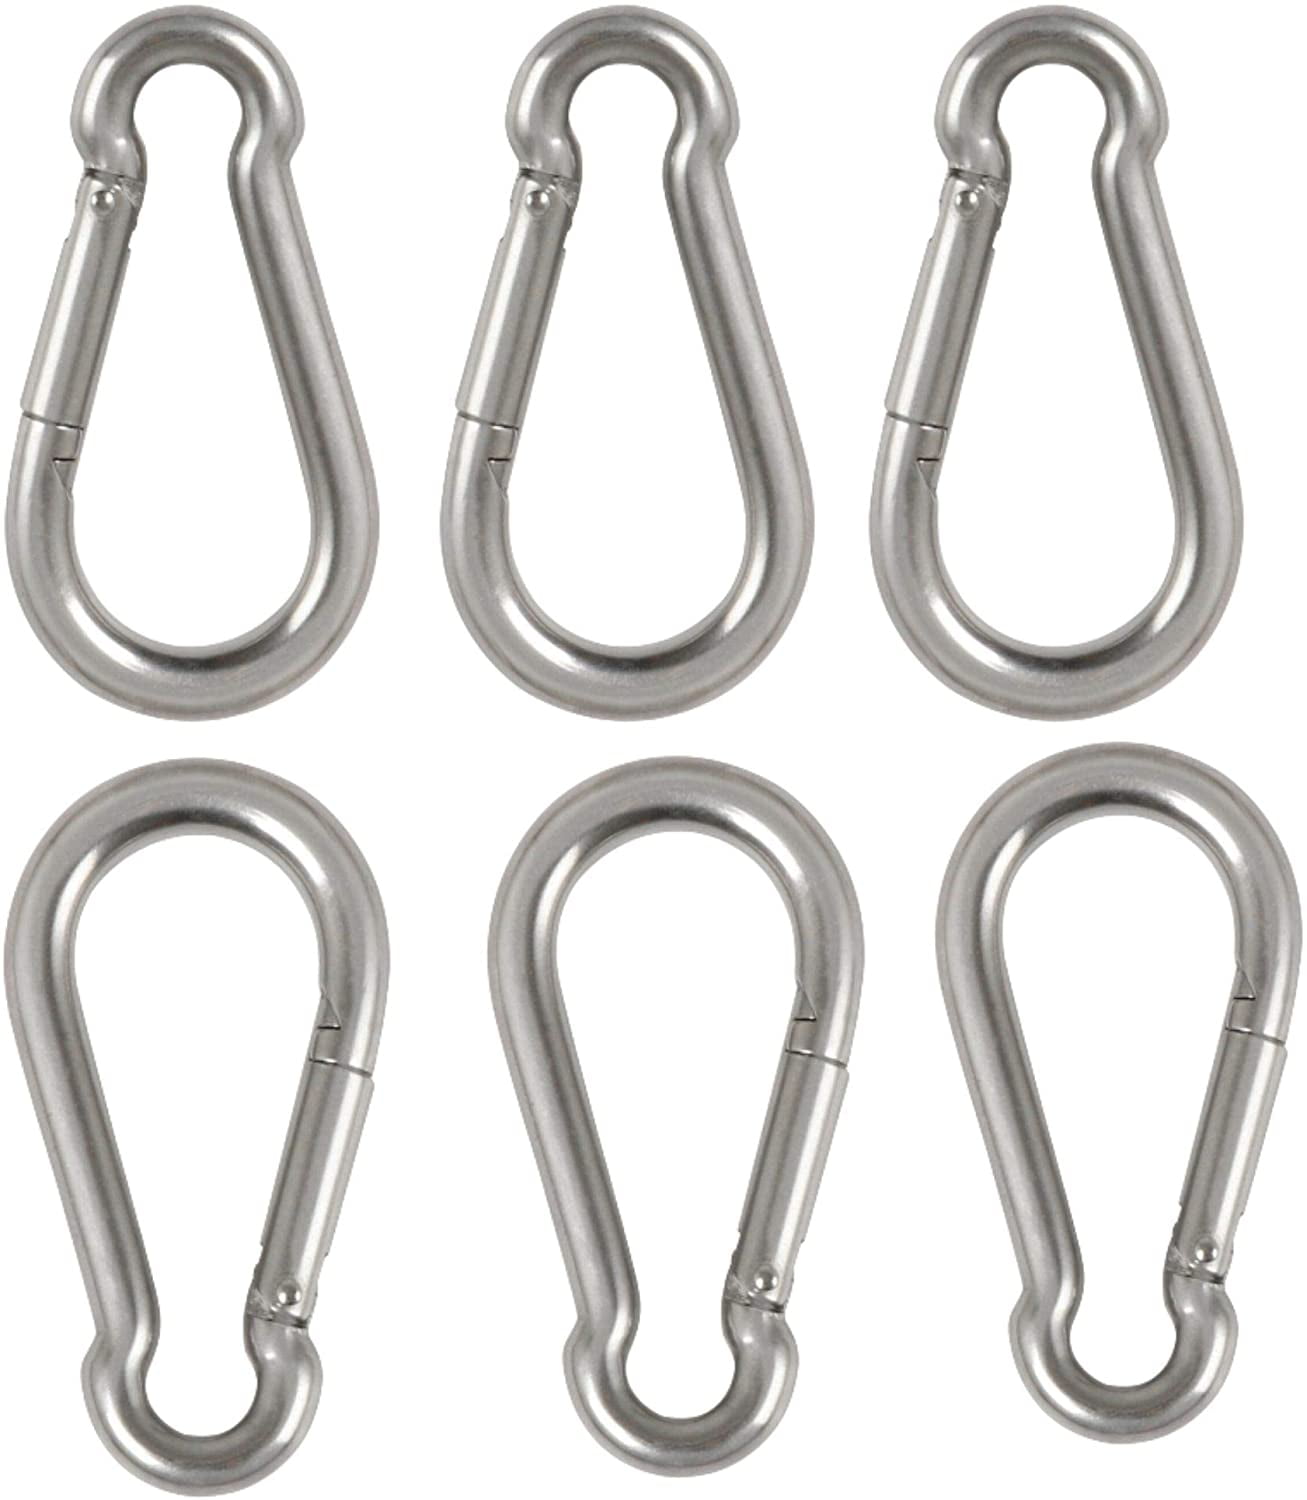 2 x 5mm Snap Hook Two Snap Hooks Zinc Plated For Chains And Ropes Securit 